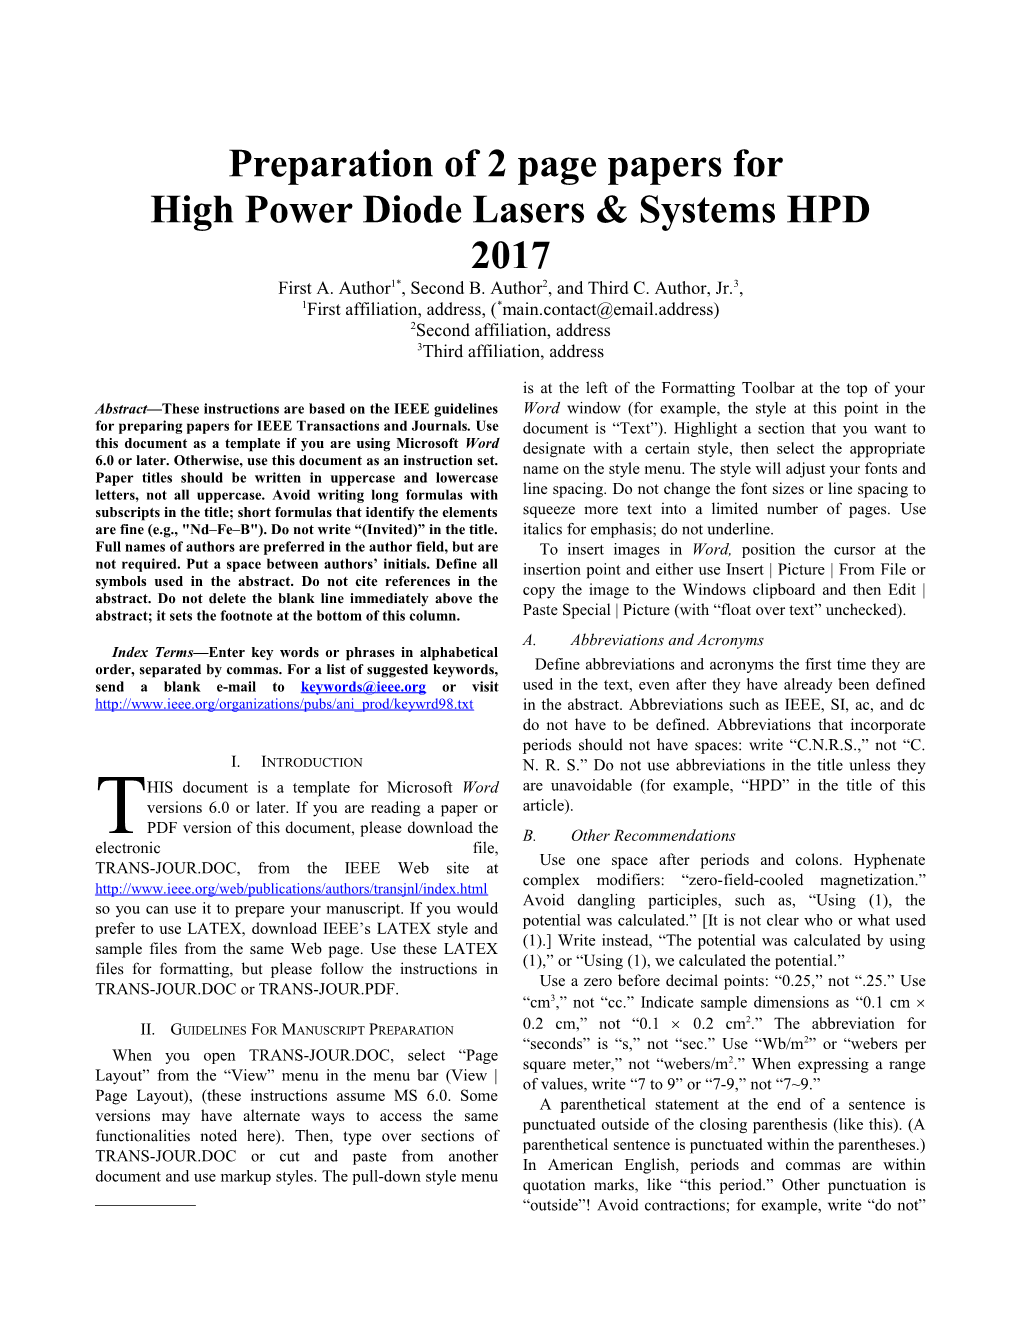 Preparation of 2 Page Papers for High Power Diode Lasers & Systems HPD 2017